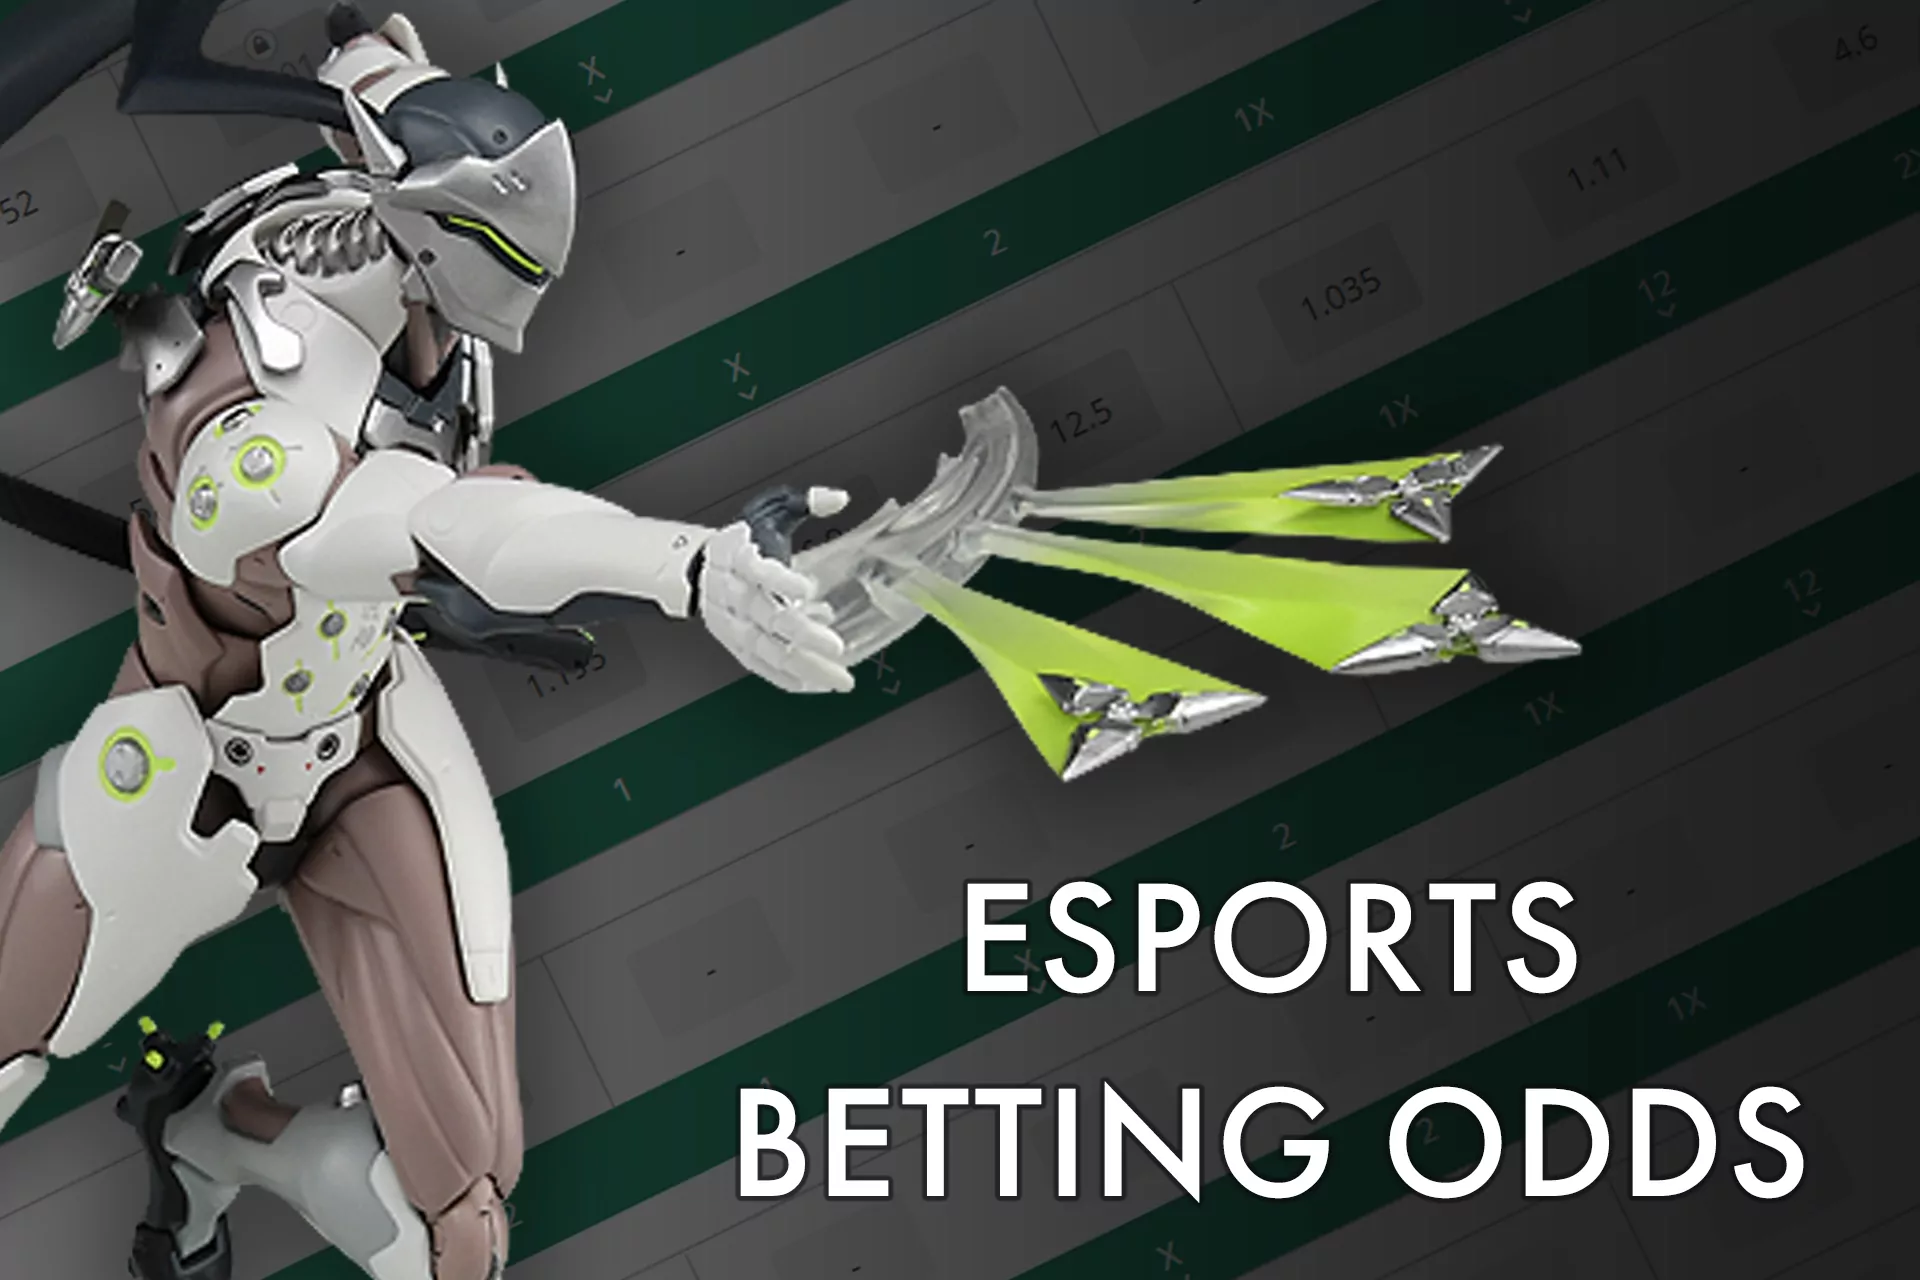 E-sports odds are dependent on the rating of a team.